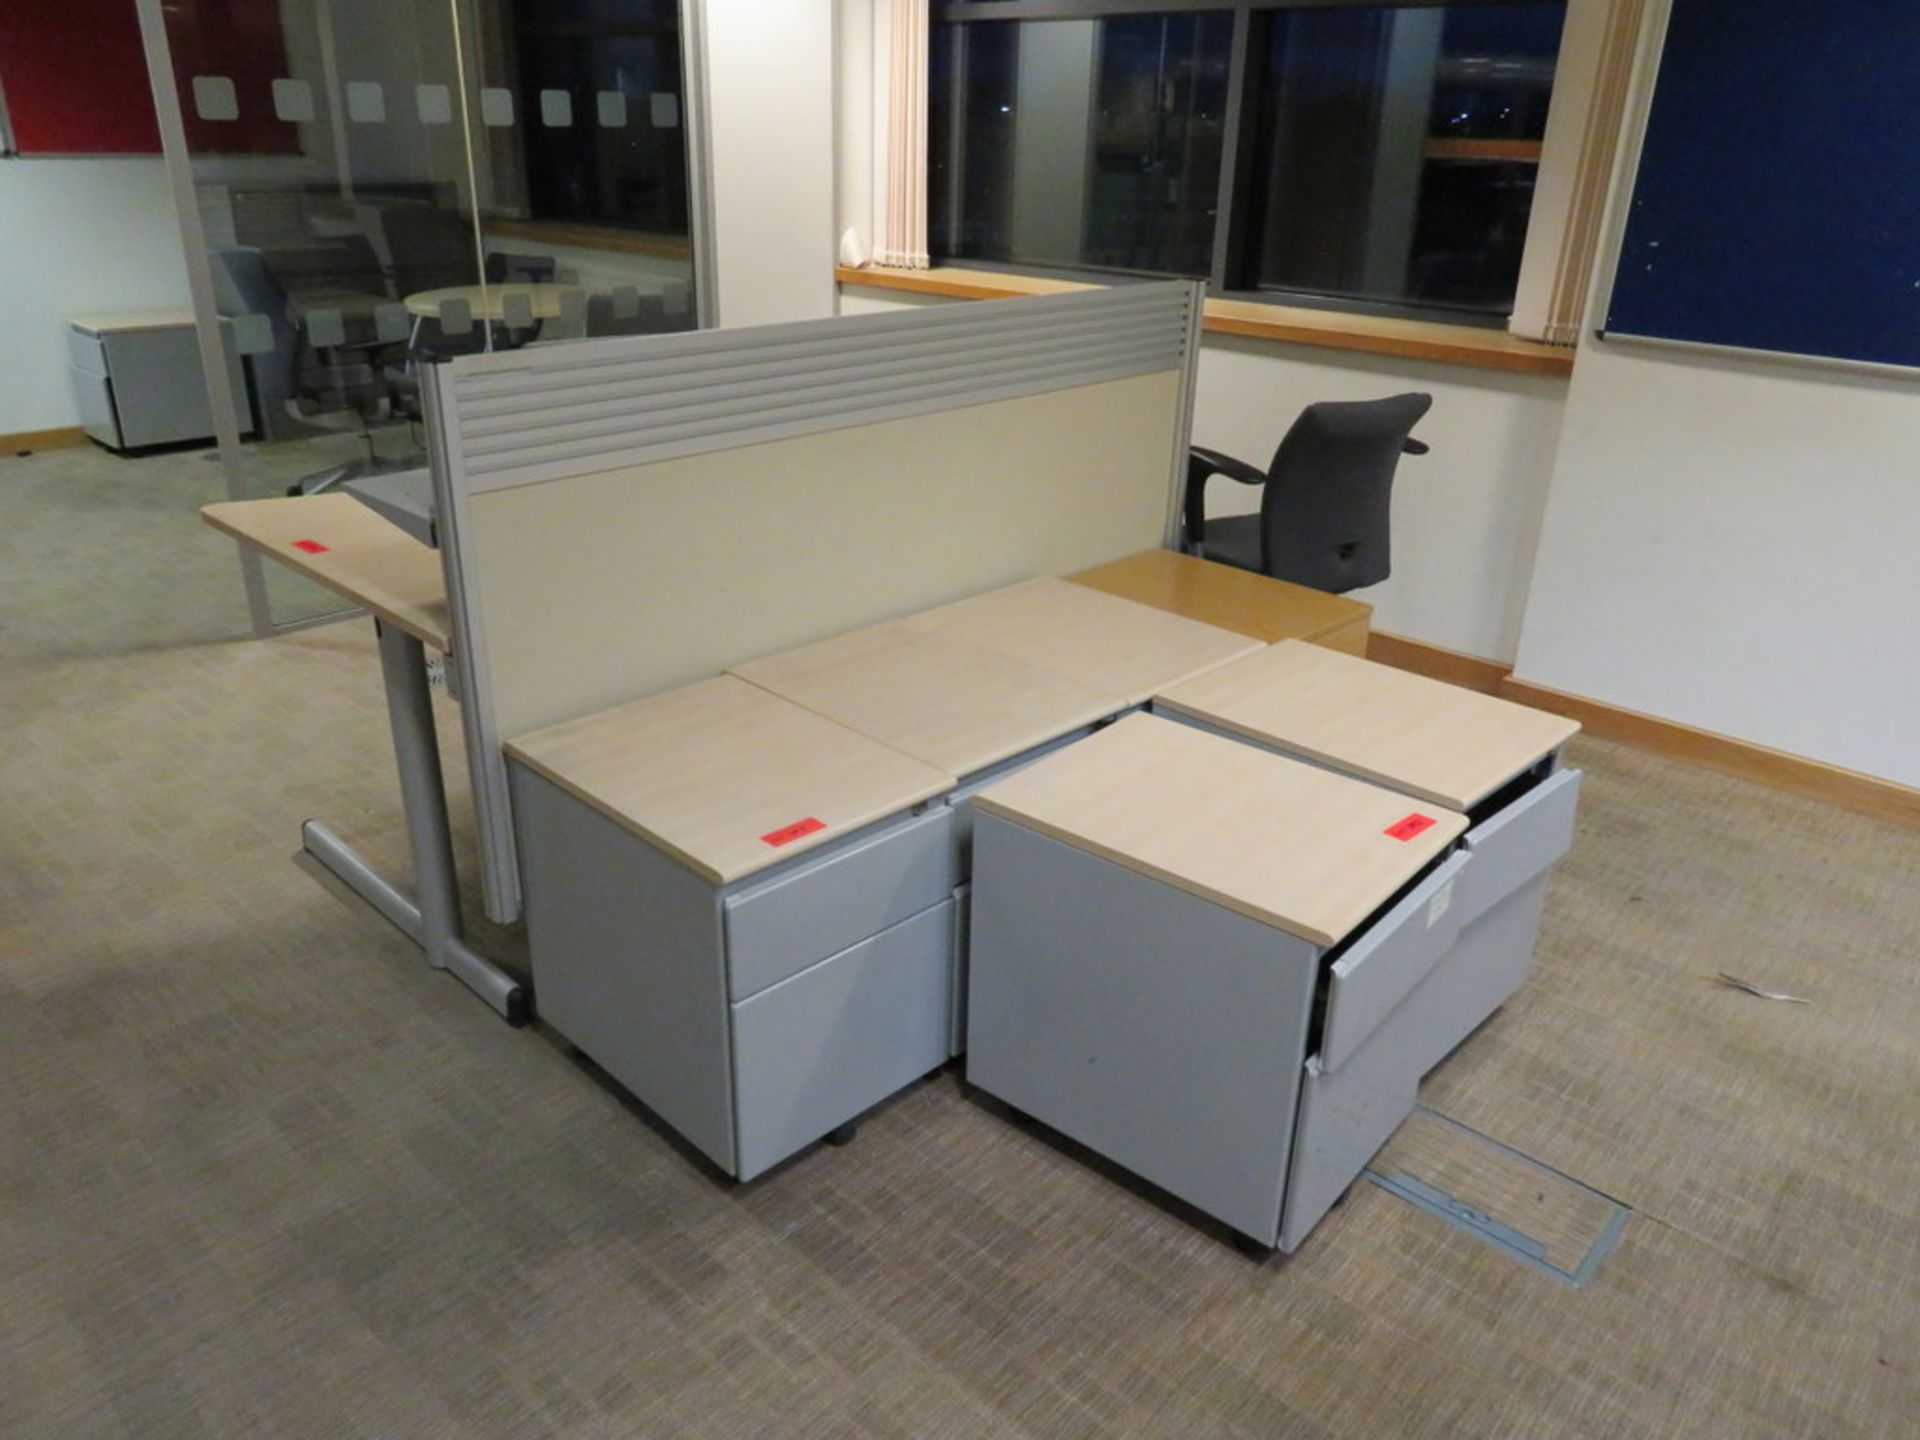 3 X LIGHTWOOD EFFECT CURVED FRONT OFFICE DESKS WITH DIVIDERS, 2 X SWIVEL - Image 3 of 4